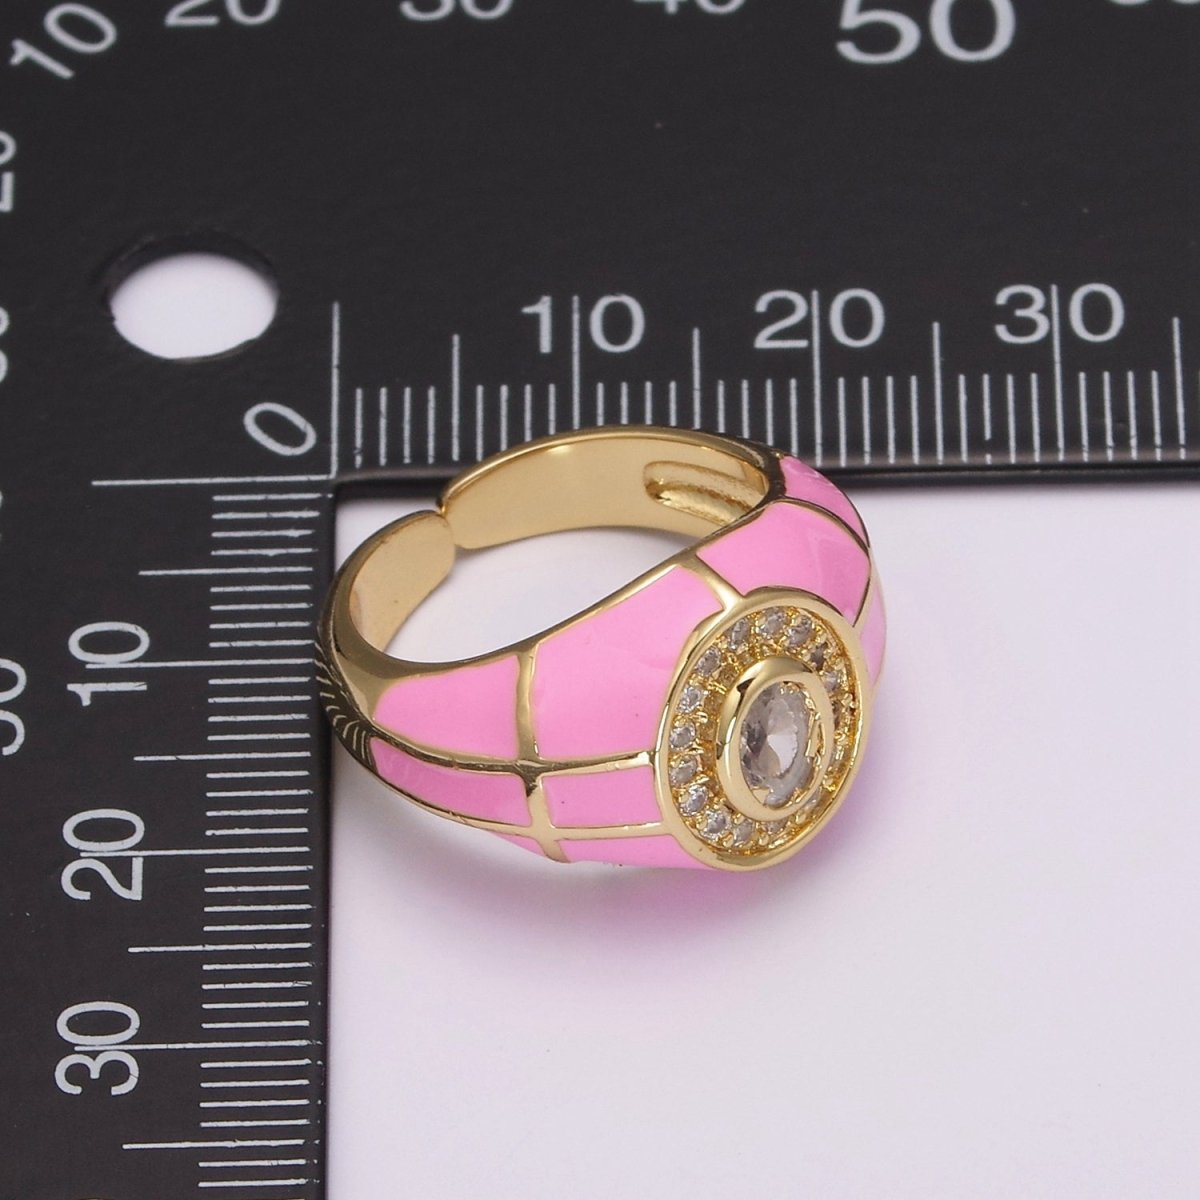 14K Gold Filled Chunky Colorful Ring • Dome Cocktail Ring • ENAMEL Pink Green Black White Ring U-137 ~ U-141 - DLUXCA